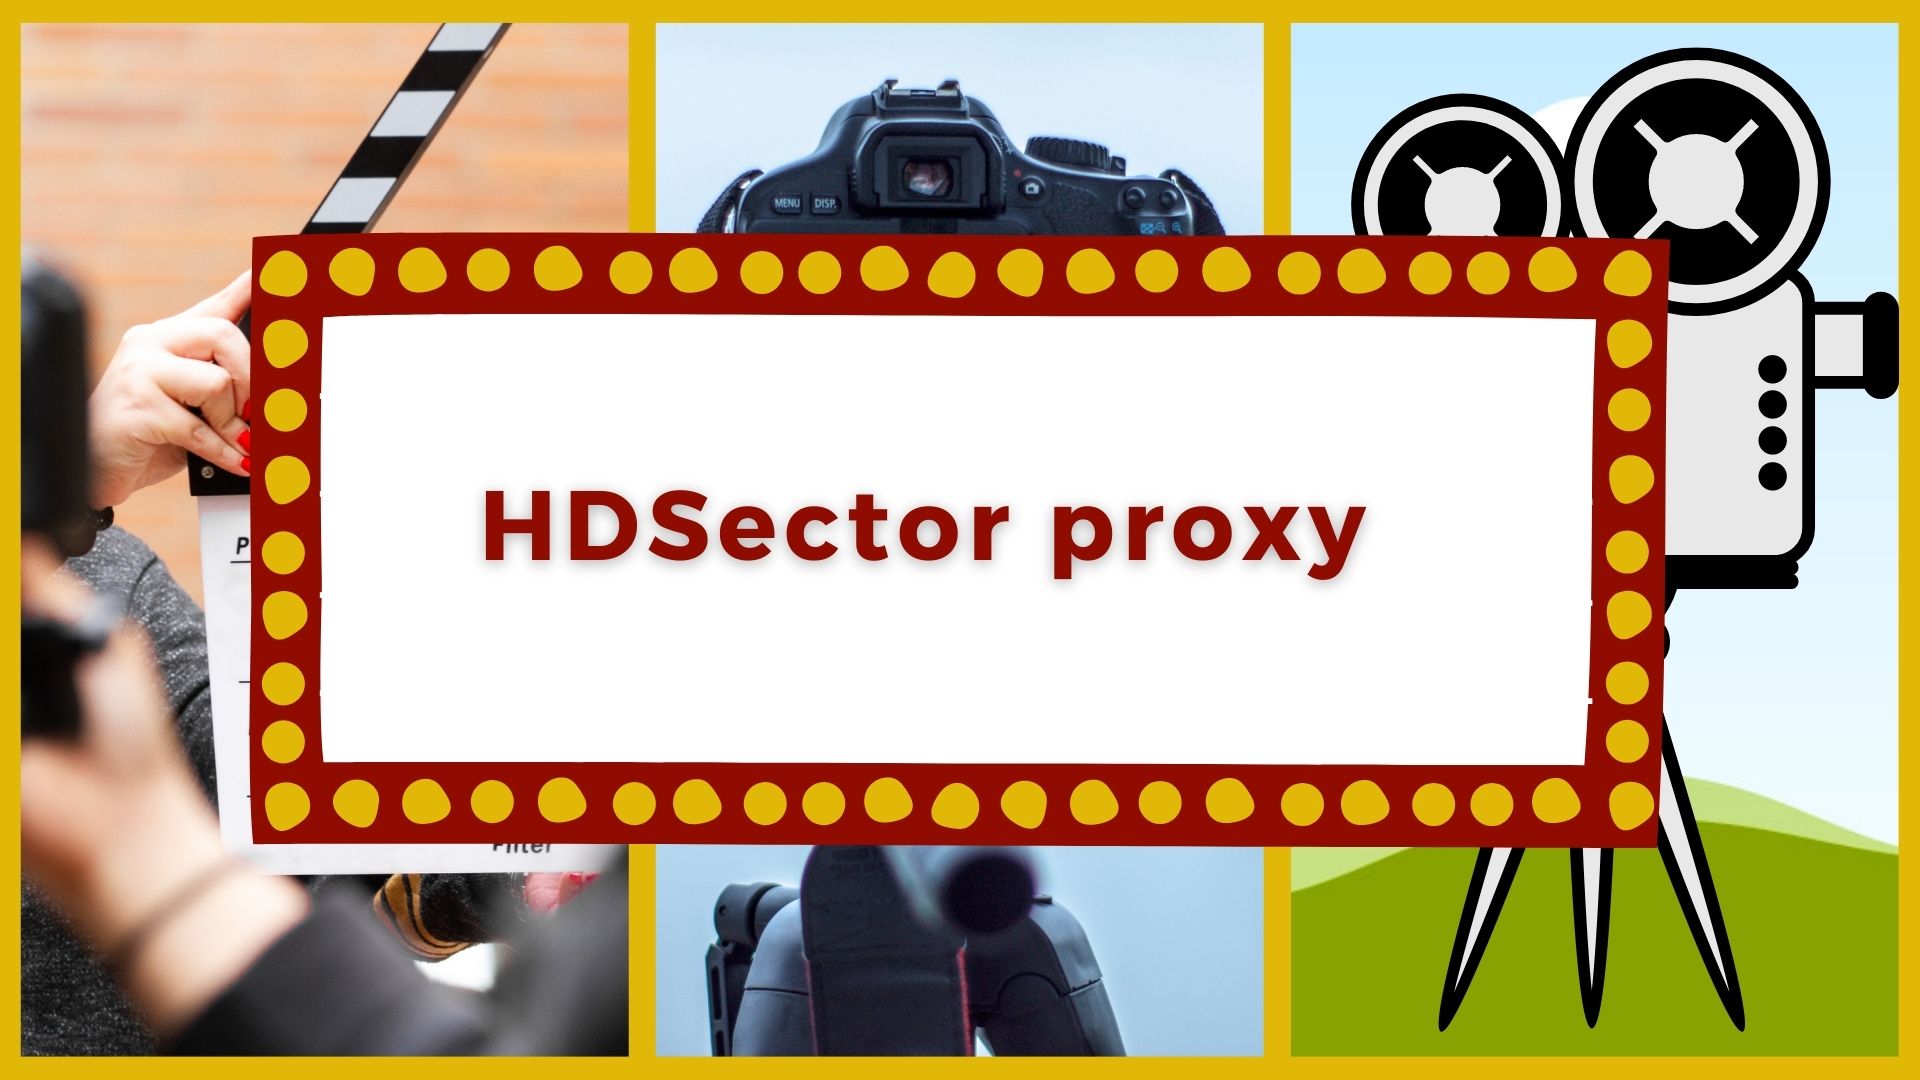 How to Unblock Hdsector Proxy